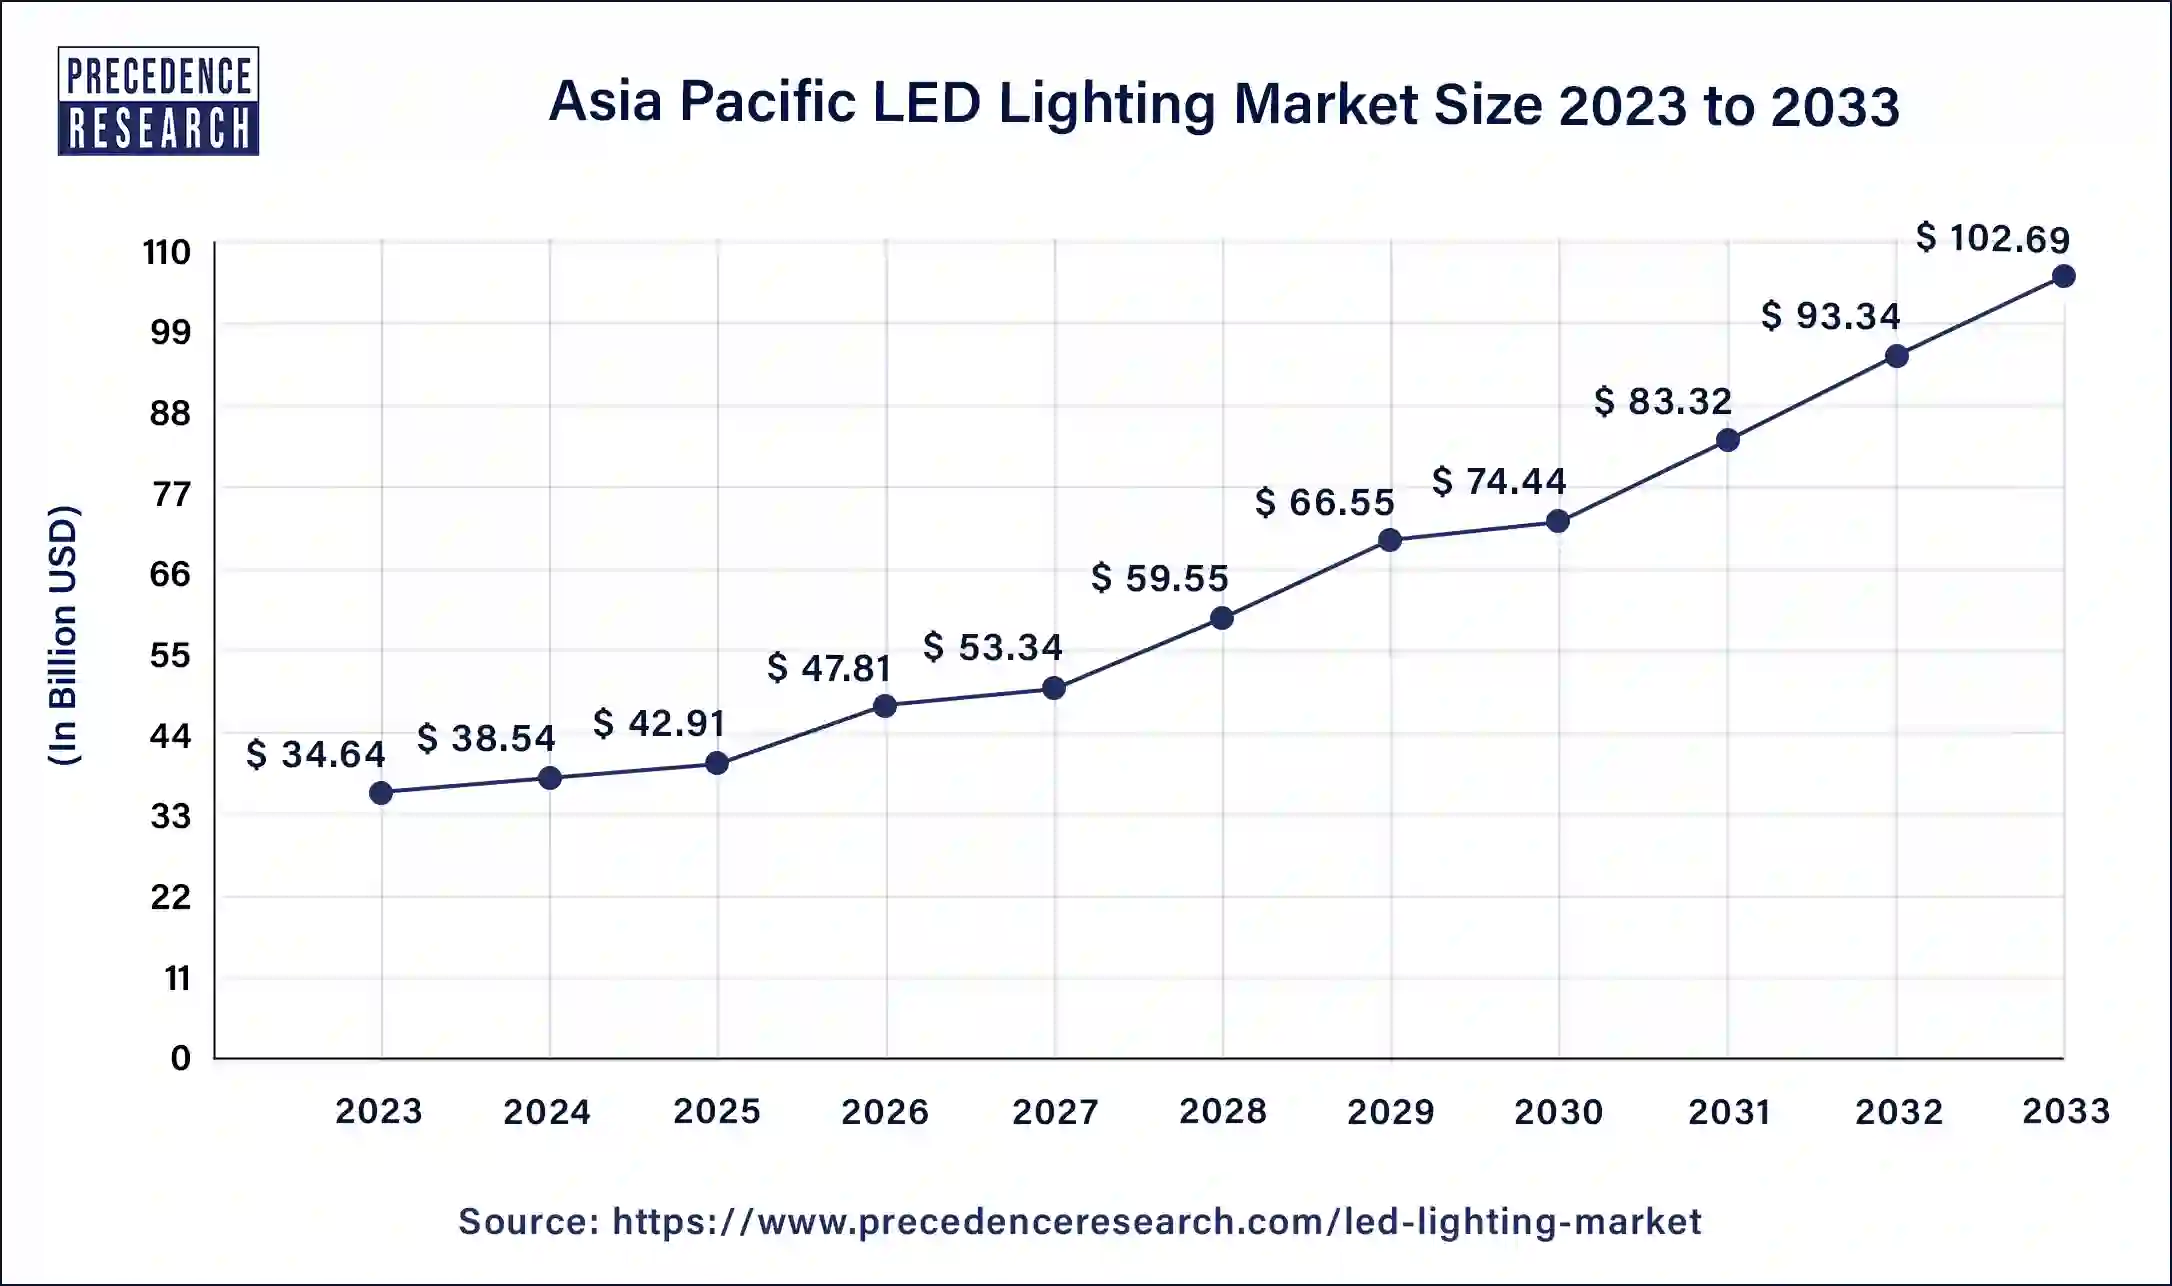 Asia Pacific LED Lighting Market Size 2024 to 2033